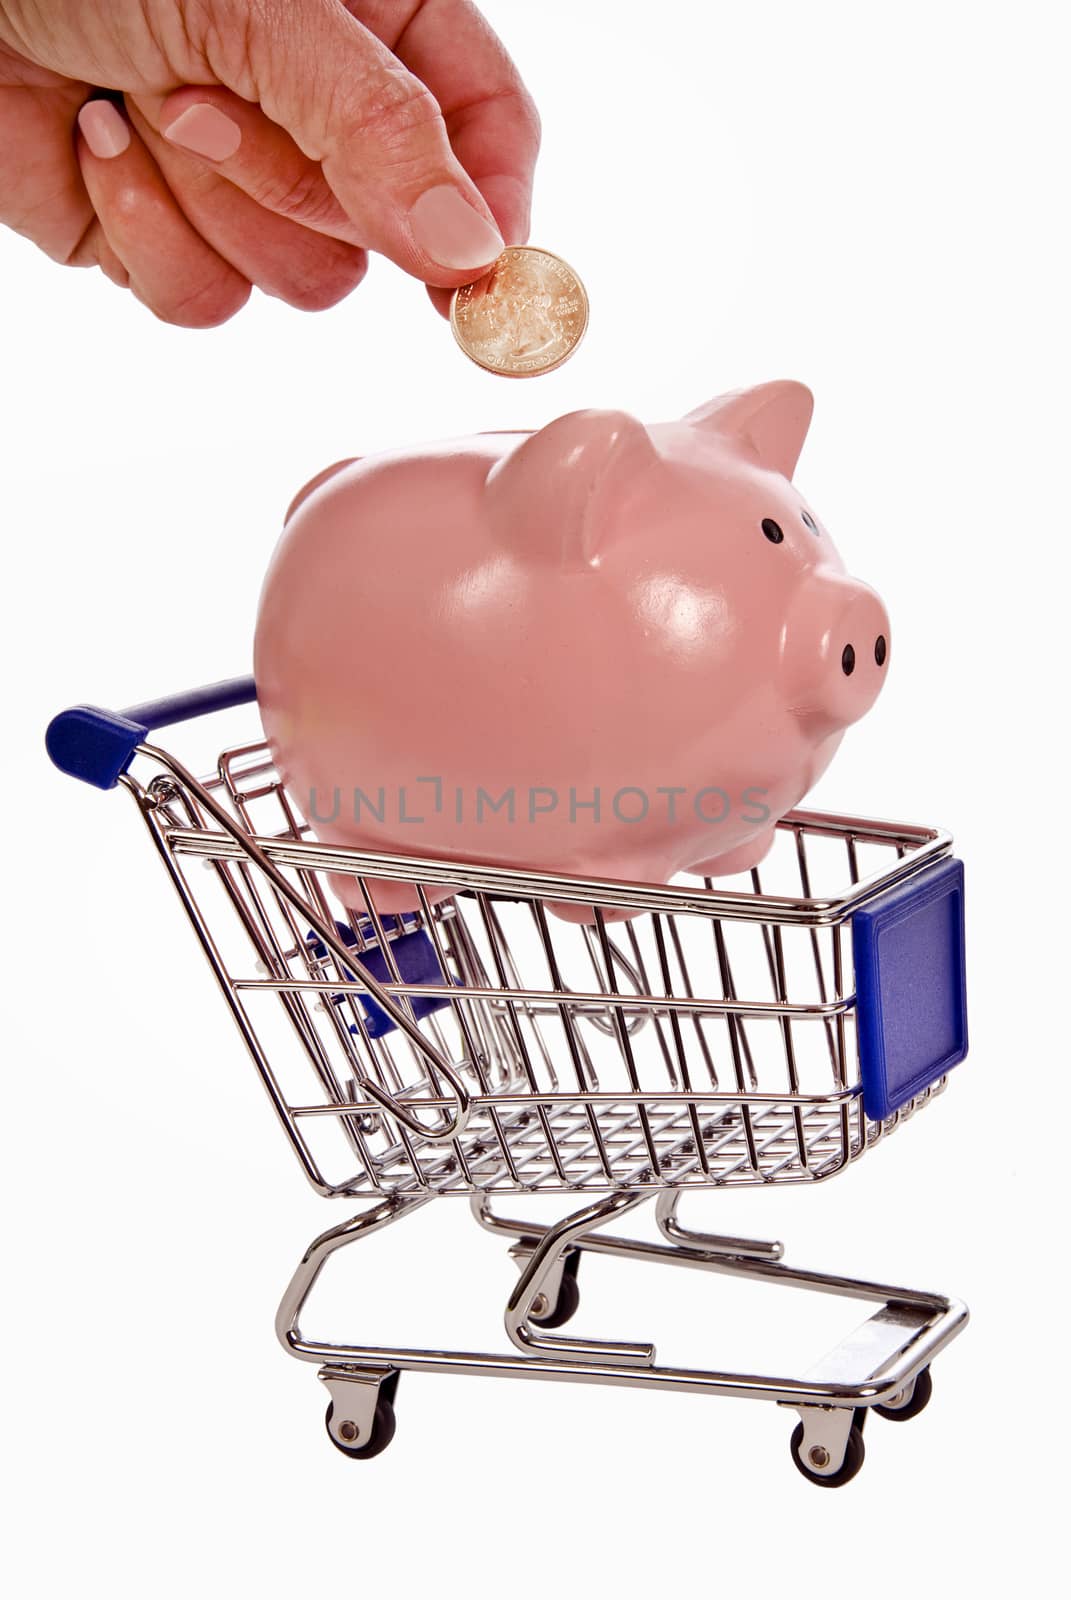 Saving money when shopping concept.  Hand putting coin into piggy bank sitting in shopping cart.